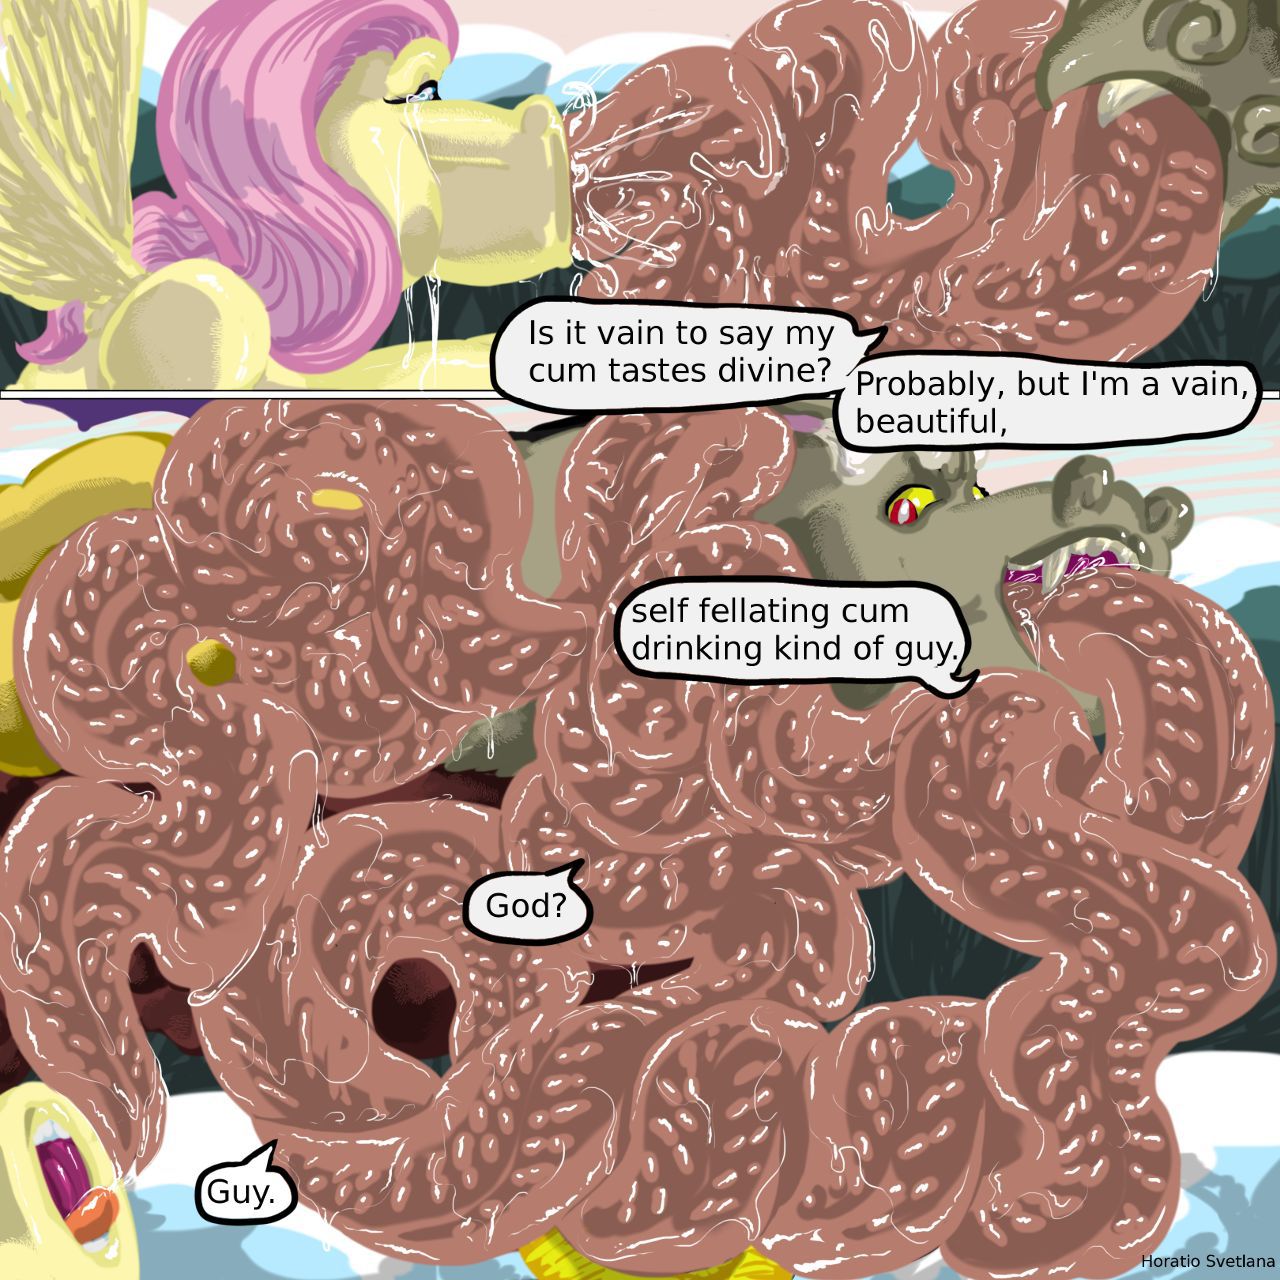 [Horatio Svetlana] Fluttershy's Discord Day (My Little Pony Friendship Is Magic) [Ongoing] 72